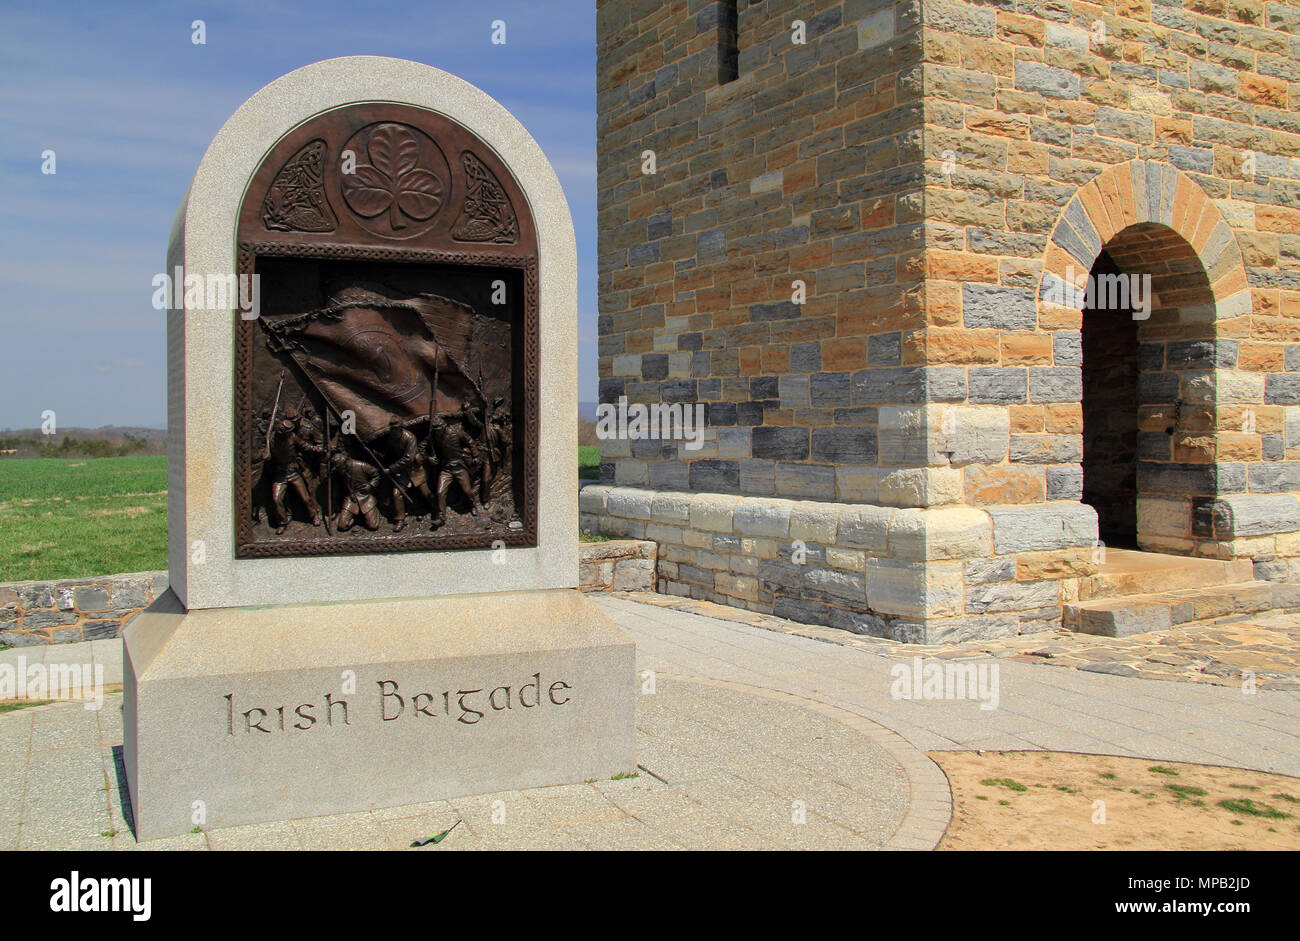 The Irish Brigade Monument, at the end of Bloody Lane at Antietam, honors Irish volunteers of the 63rd, 69th, and 88th NY Voluntary Infantry Regiments Stock Photo